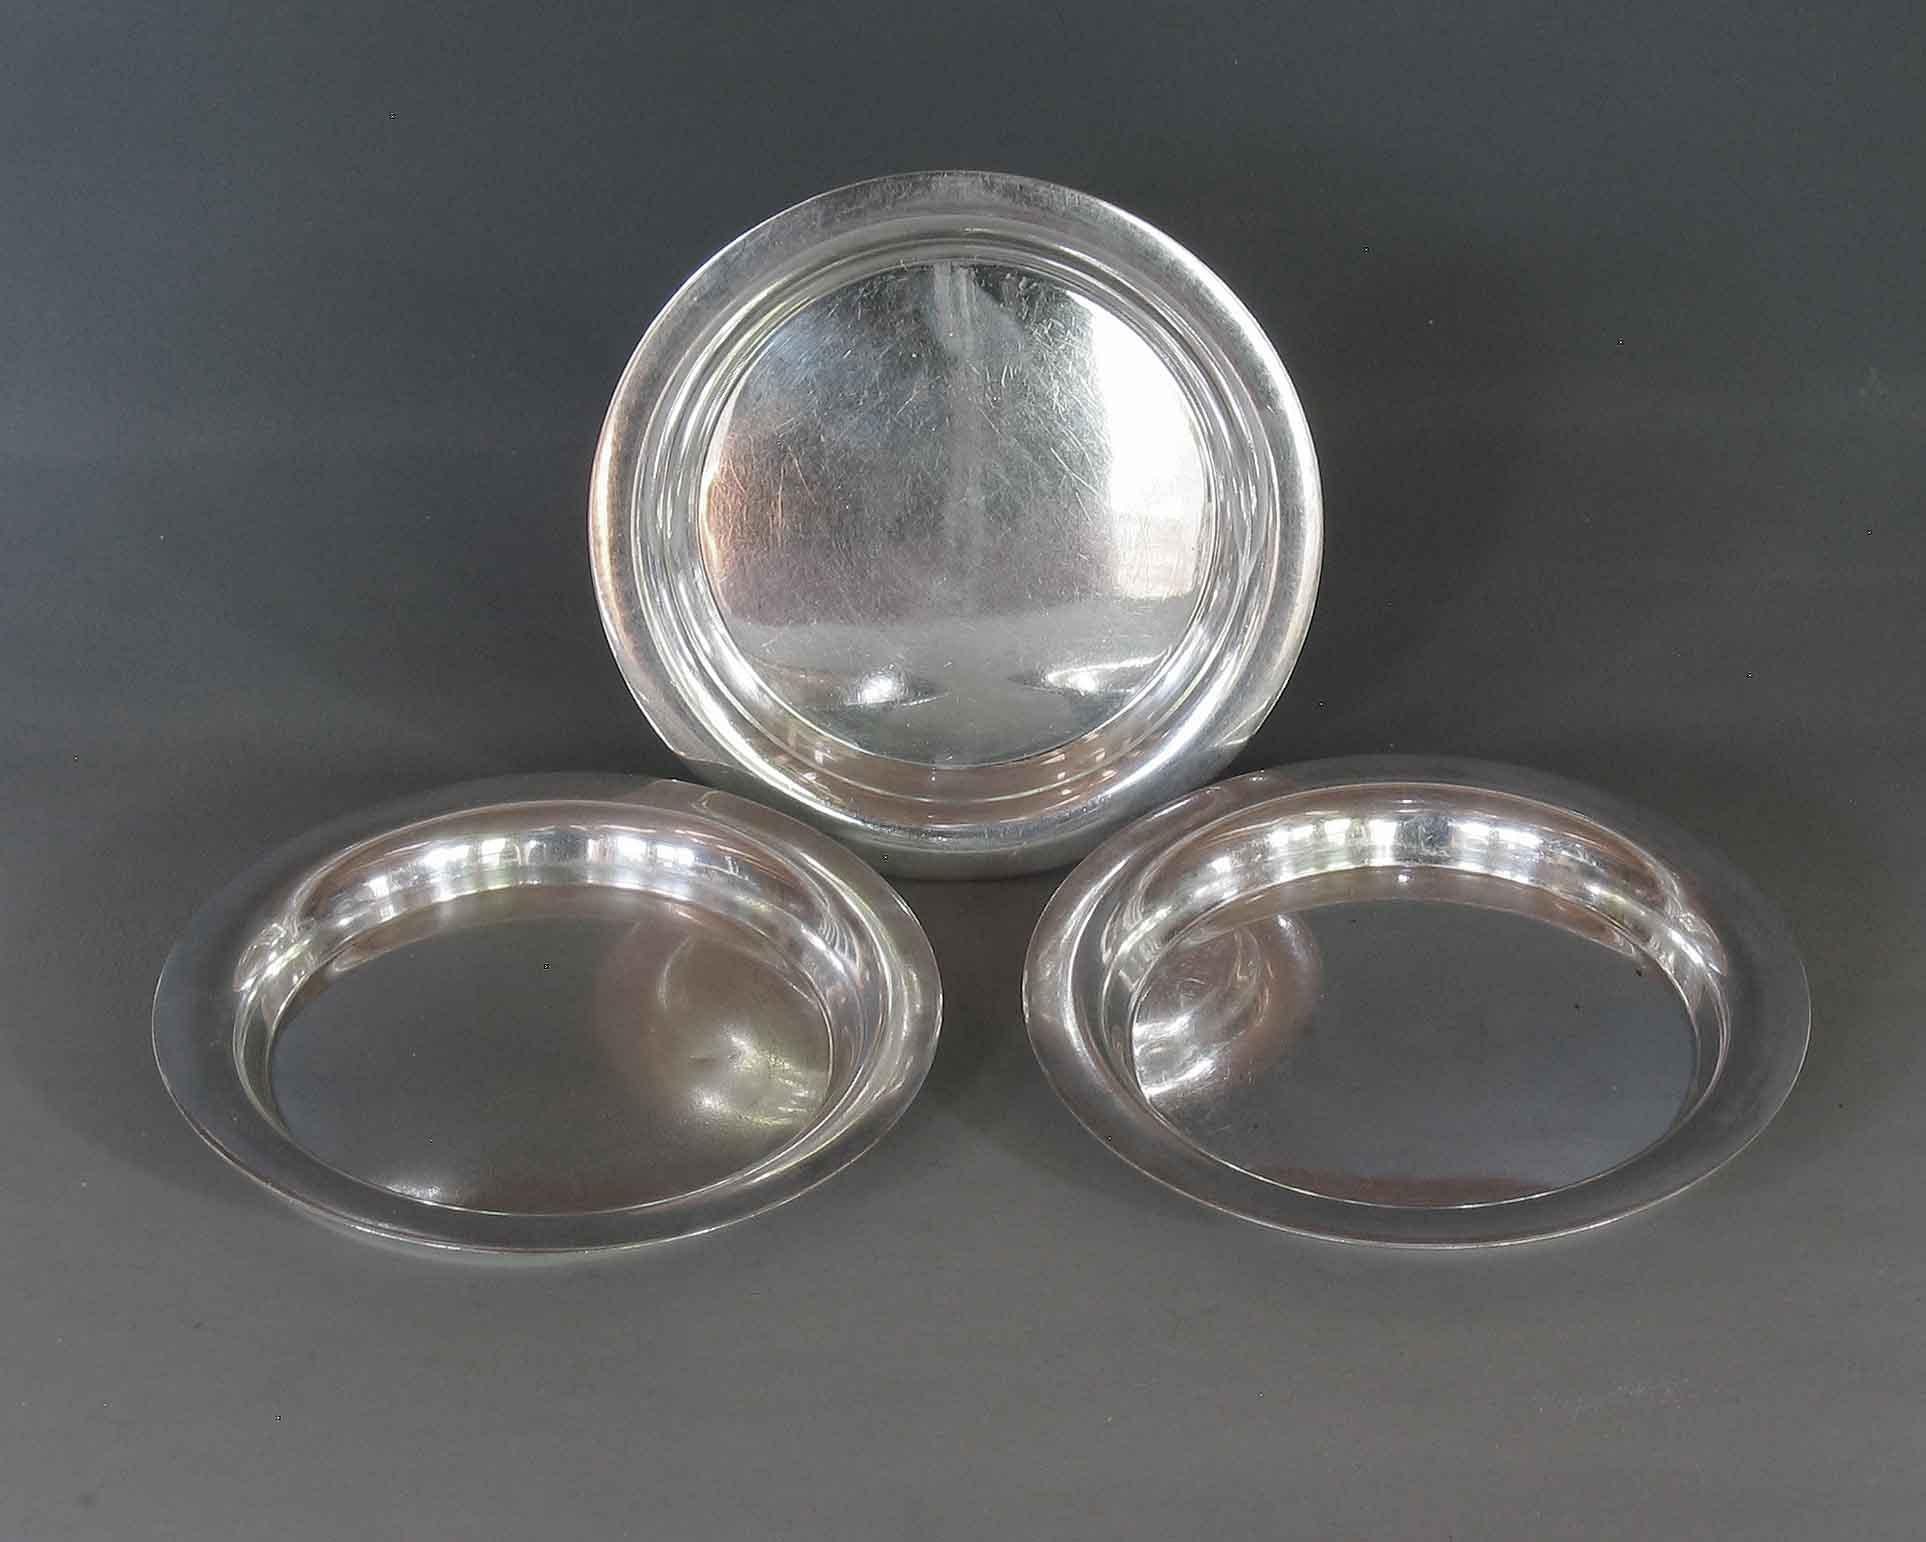 French Lot of 3 Vintage Christofle Silver-Plated Bottle/Carafe Coasters For Sale